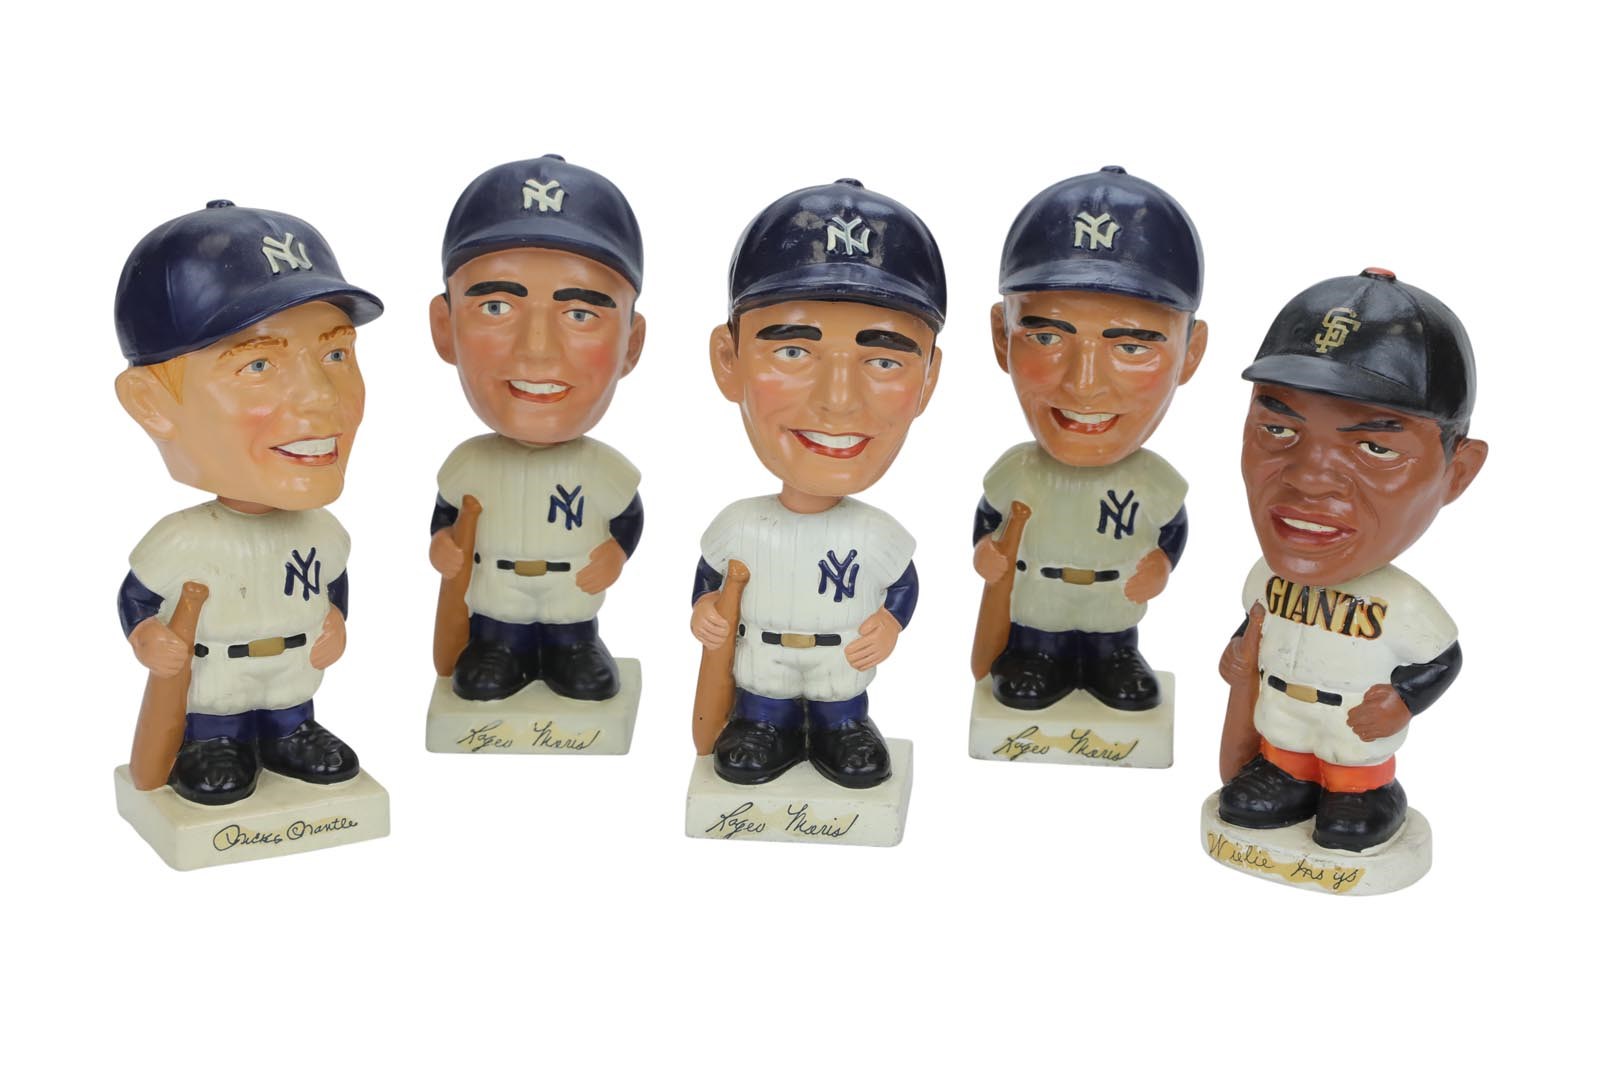 NY Yankees, Giants & Mets - 1960s Mickey Mantle, Roger Maris & Willie Mays Bobbing Heads (3)